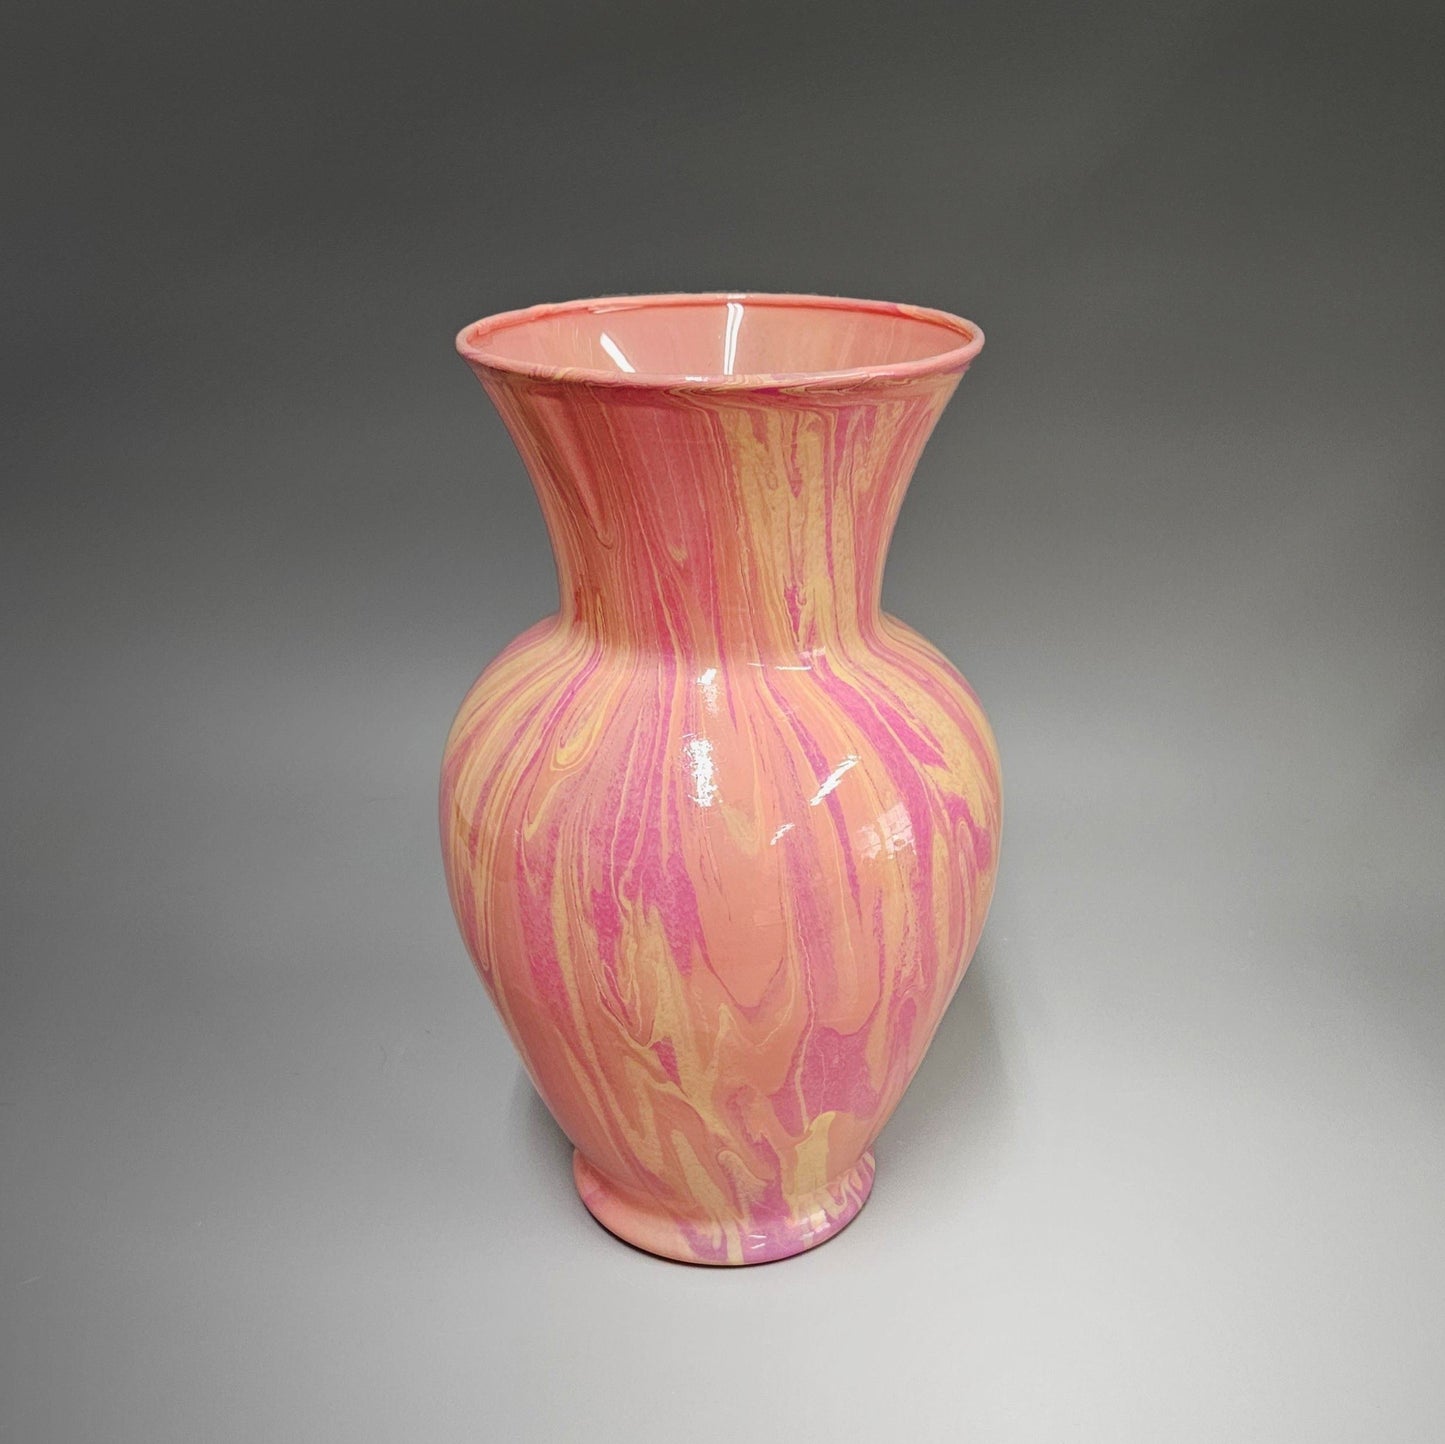 Glass Art Vase Painted in Pale Peach Pink and Yellow | One of a Kind